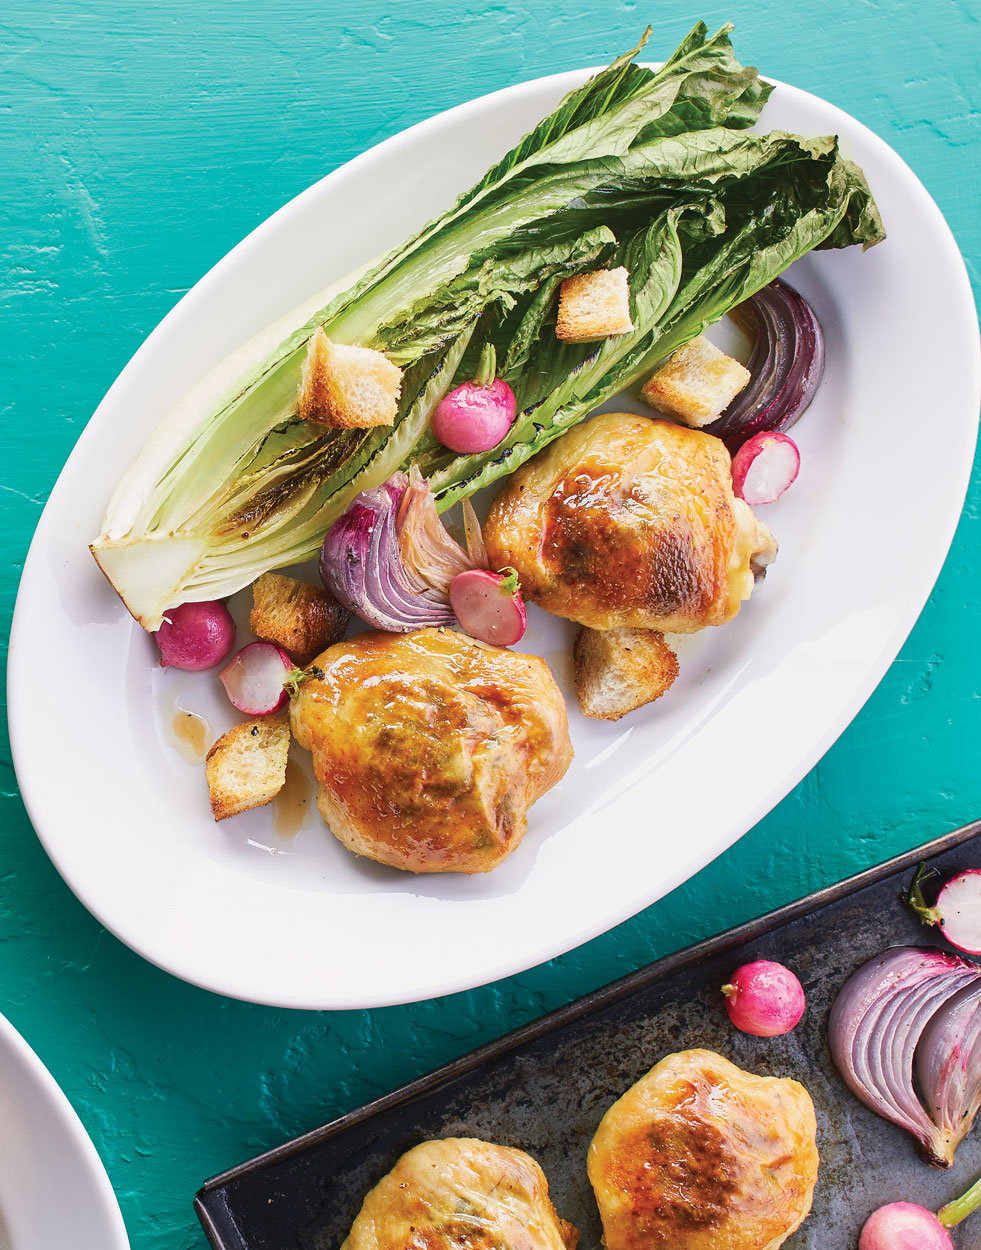 Sheet Pan Chicken Thighs with charred salad